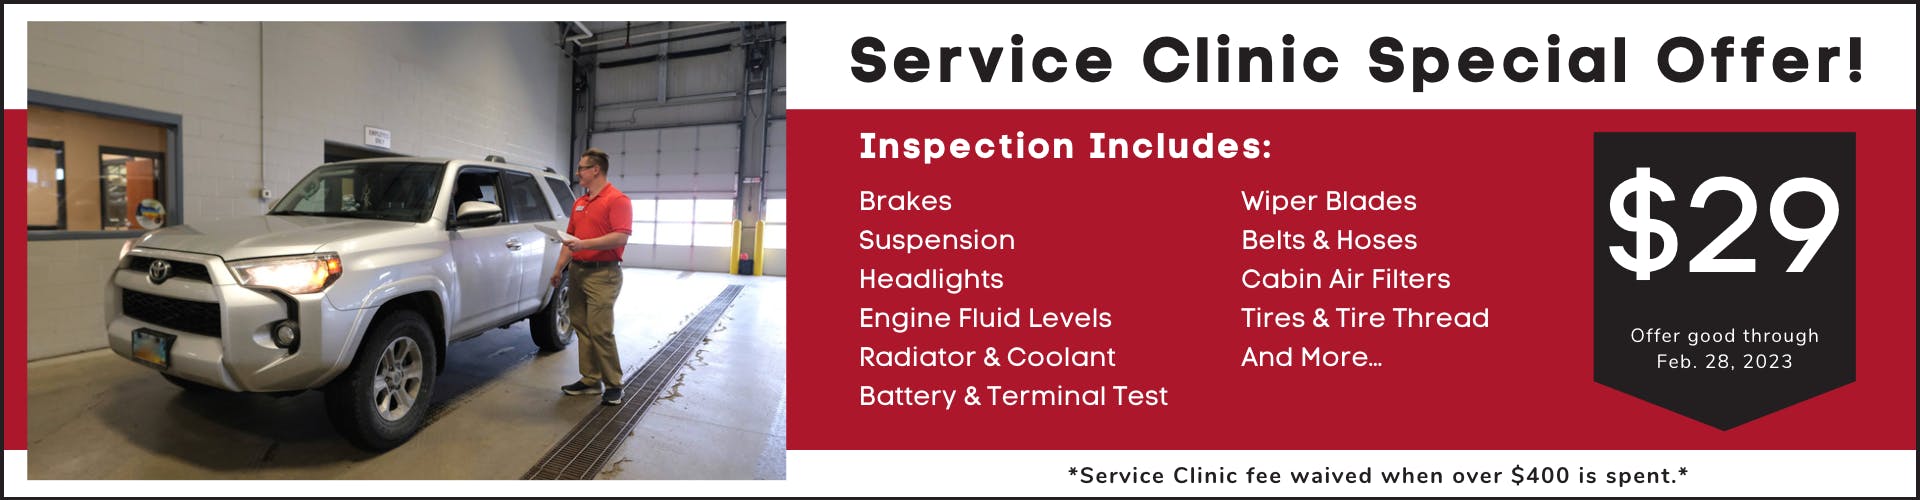 2New Service Clinic Special Offer